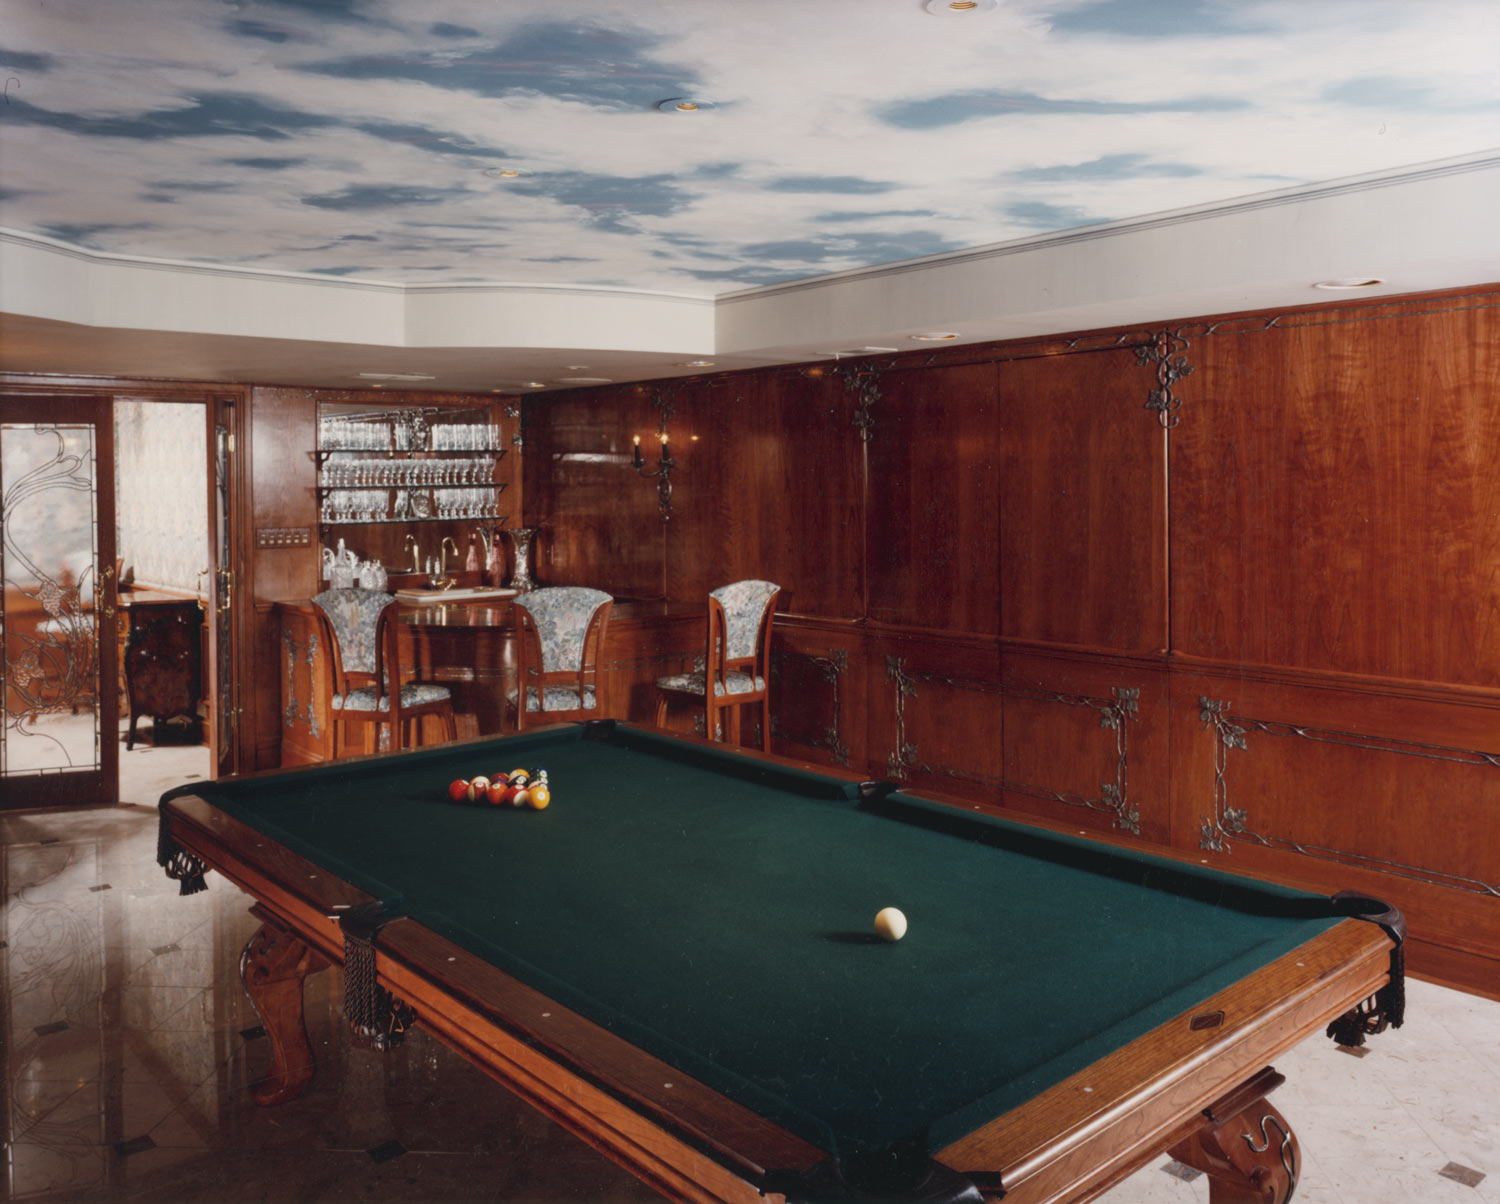 Billiards Room Entry View